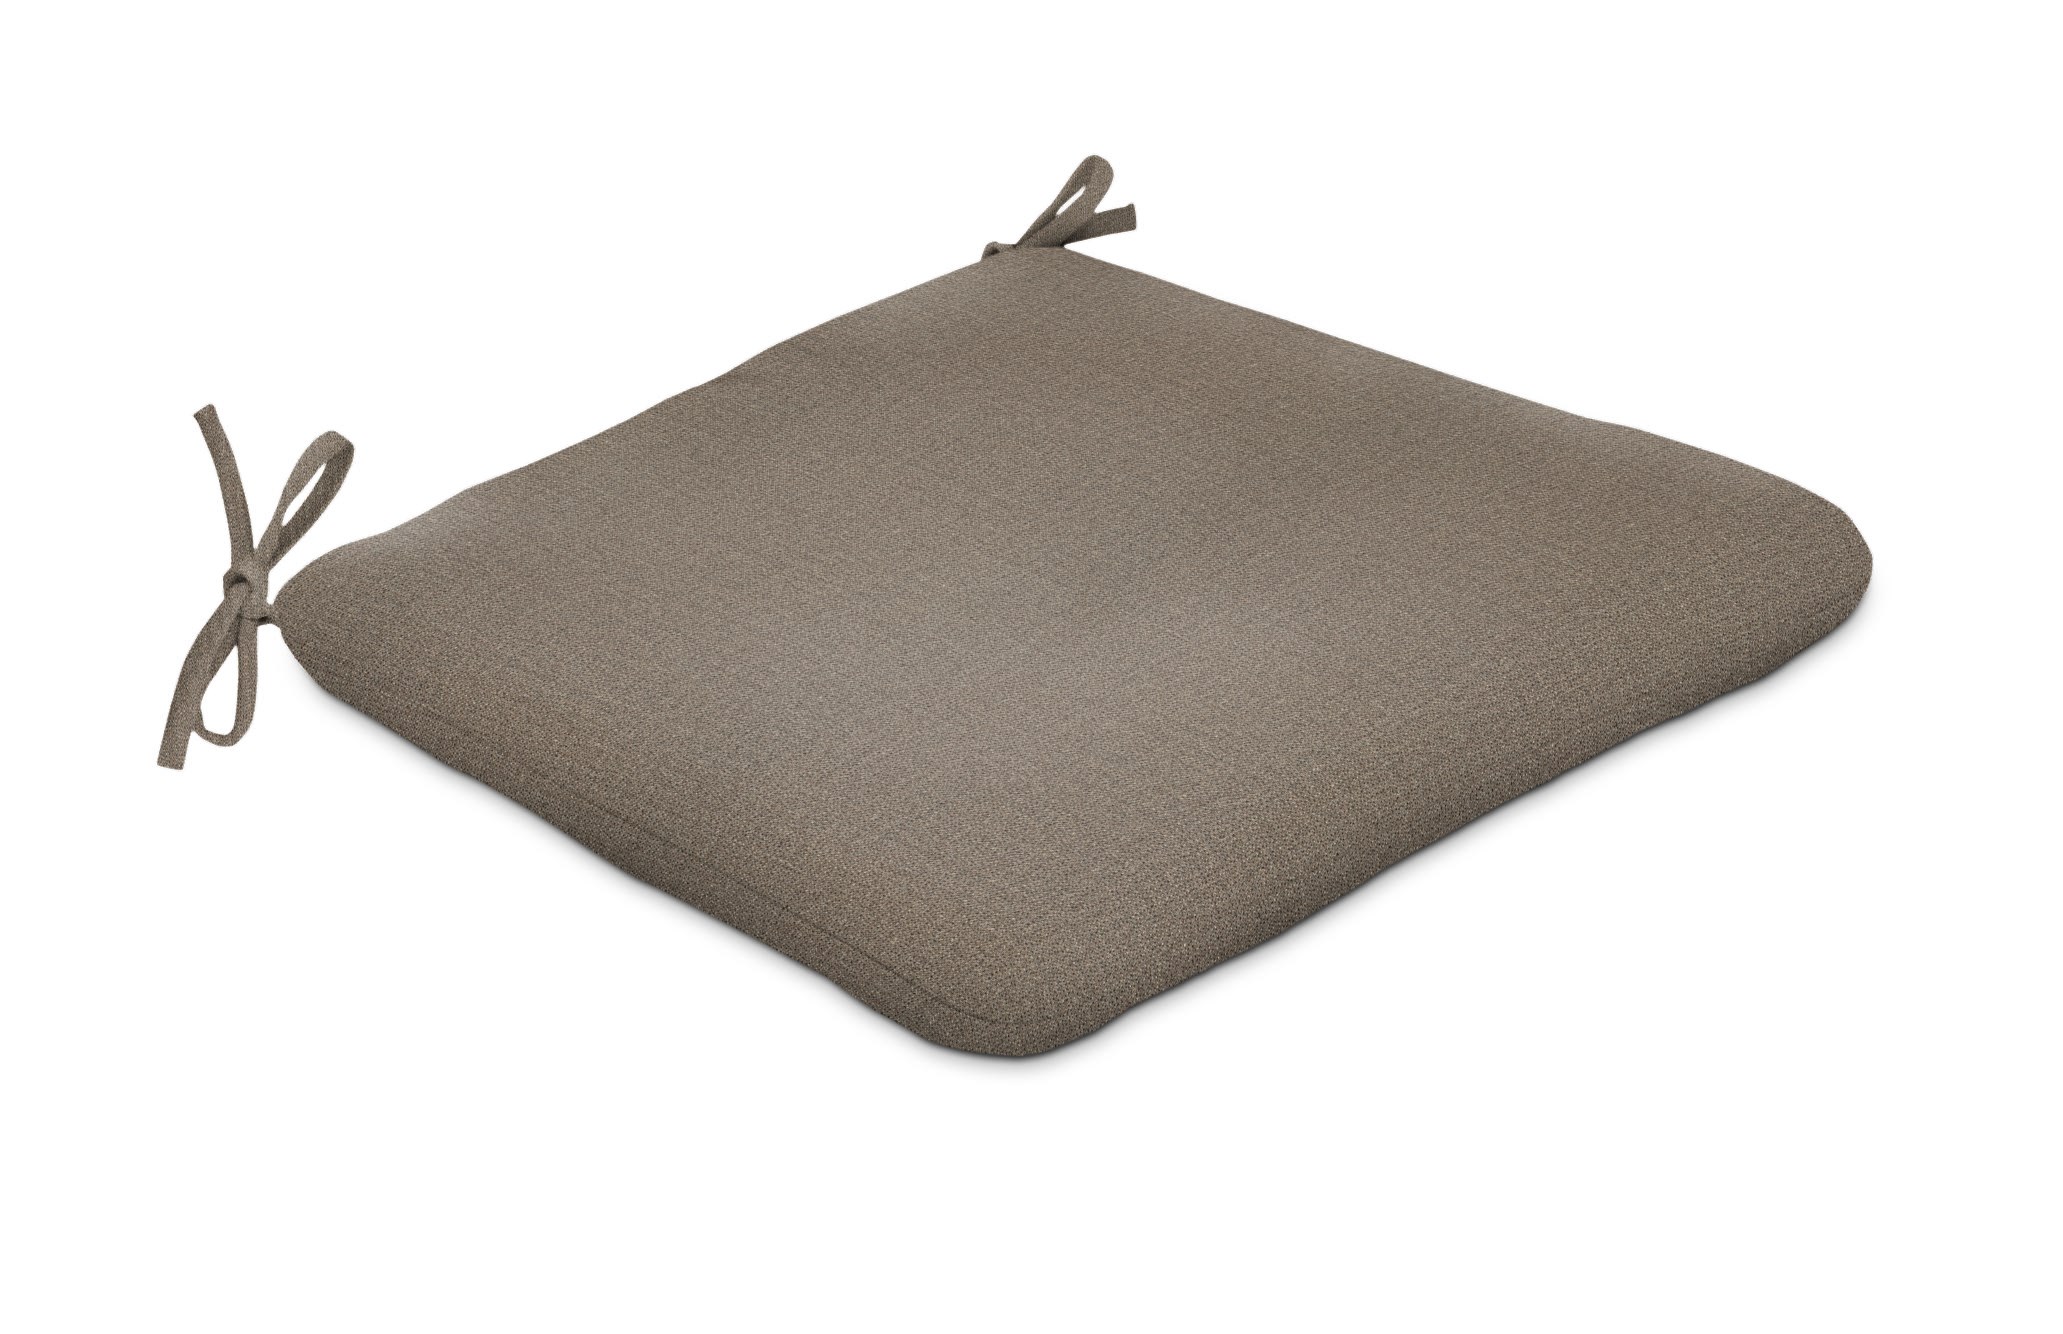 20.5/18 x 18 Tapered Seat Pad Bliss Bark Clearance